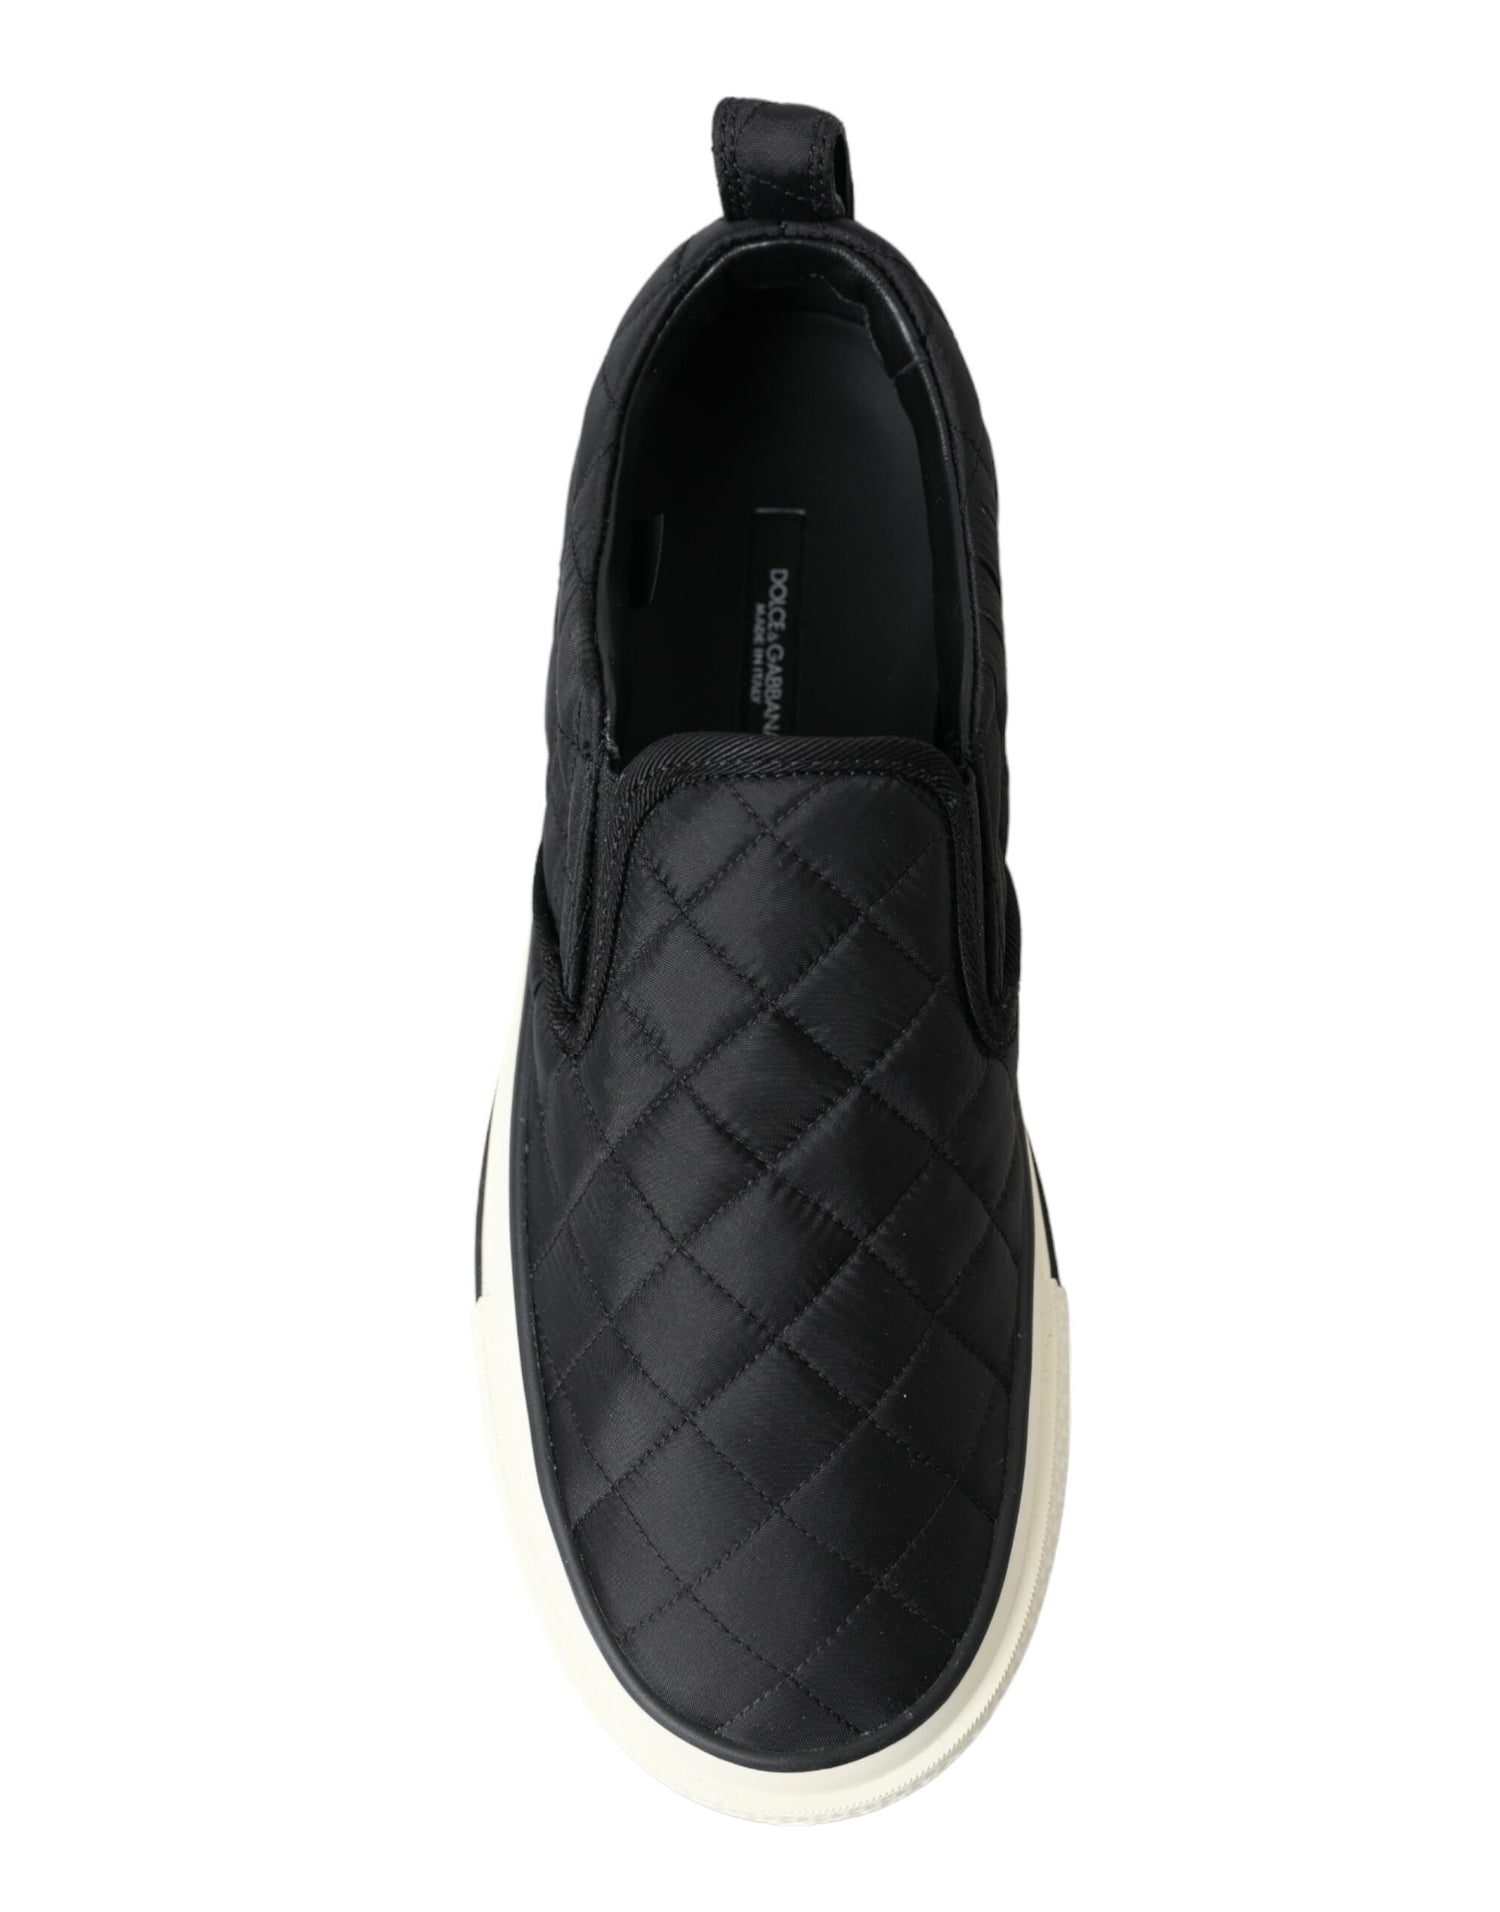 Dolce & Gabbana Black Quilted Slip On Low Top Sneakers Shoes - DEA STILOSA MILANO